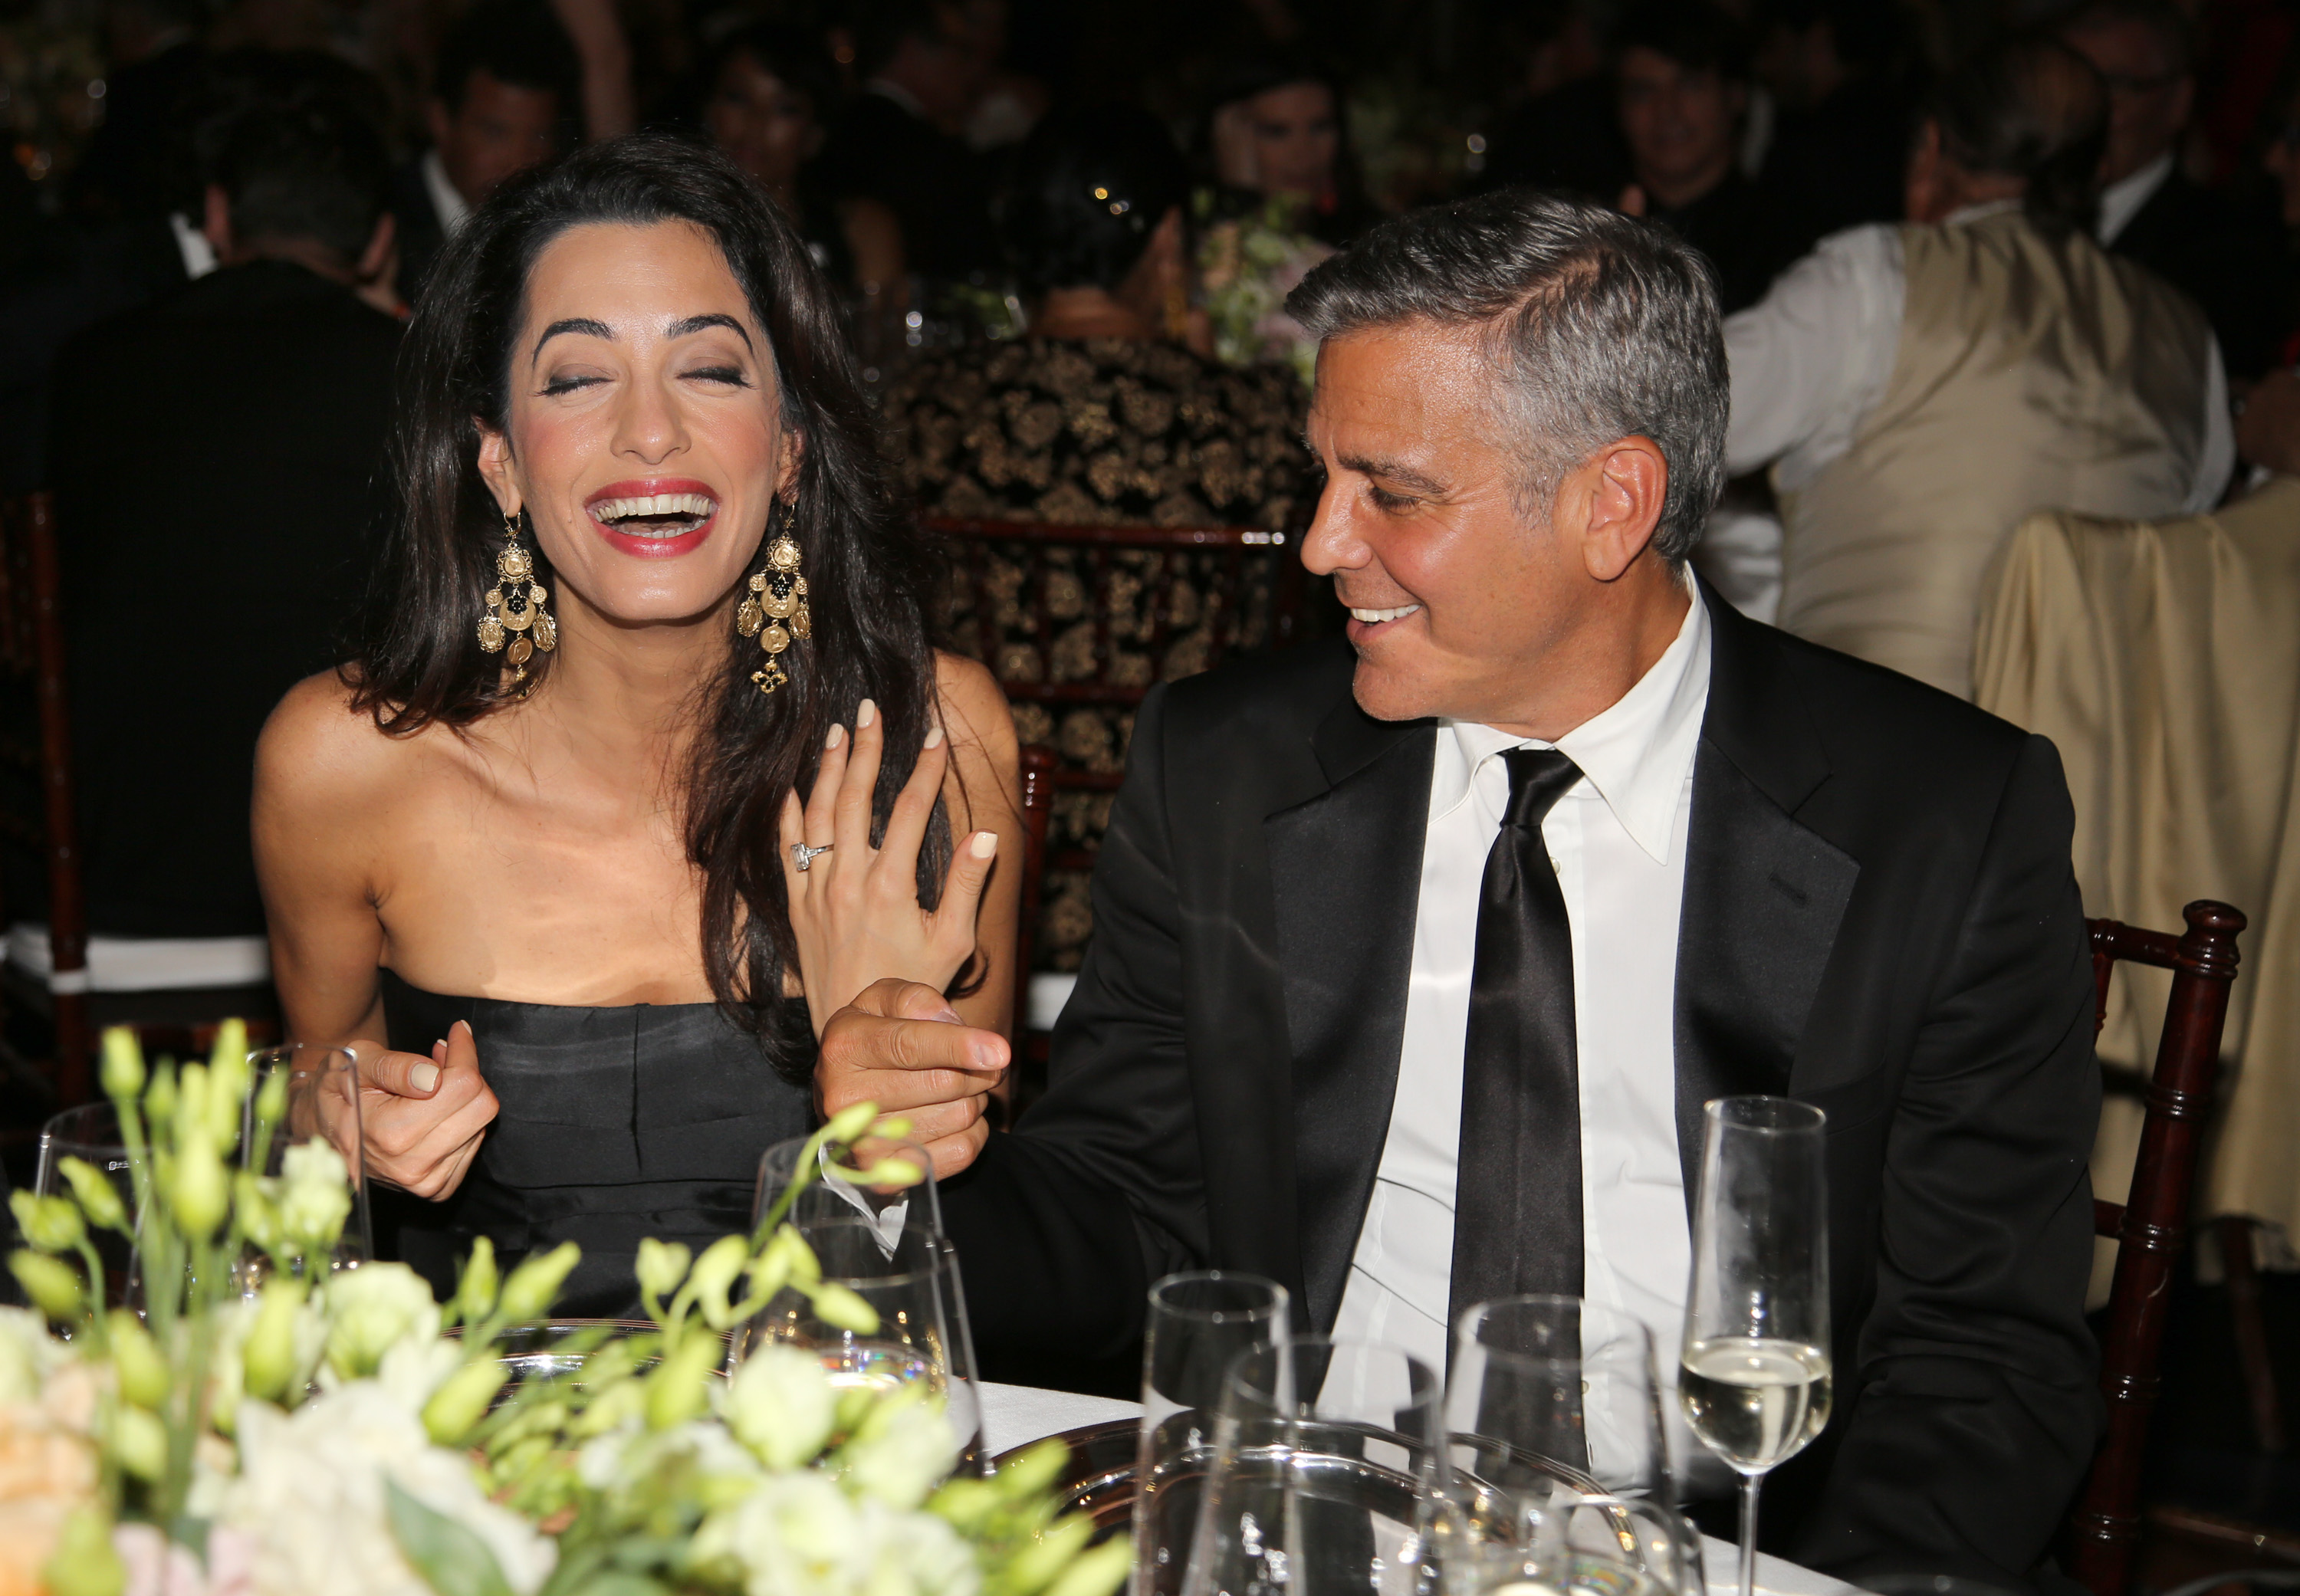 George Clooney and his fiancee Amal Alamuddin attend the Celebrity Fight Night gala celebrating Celebrity Fight Night In Italy on September 7, 2014 in Florence, Italy | Source: Getty Images